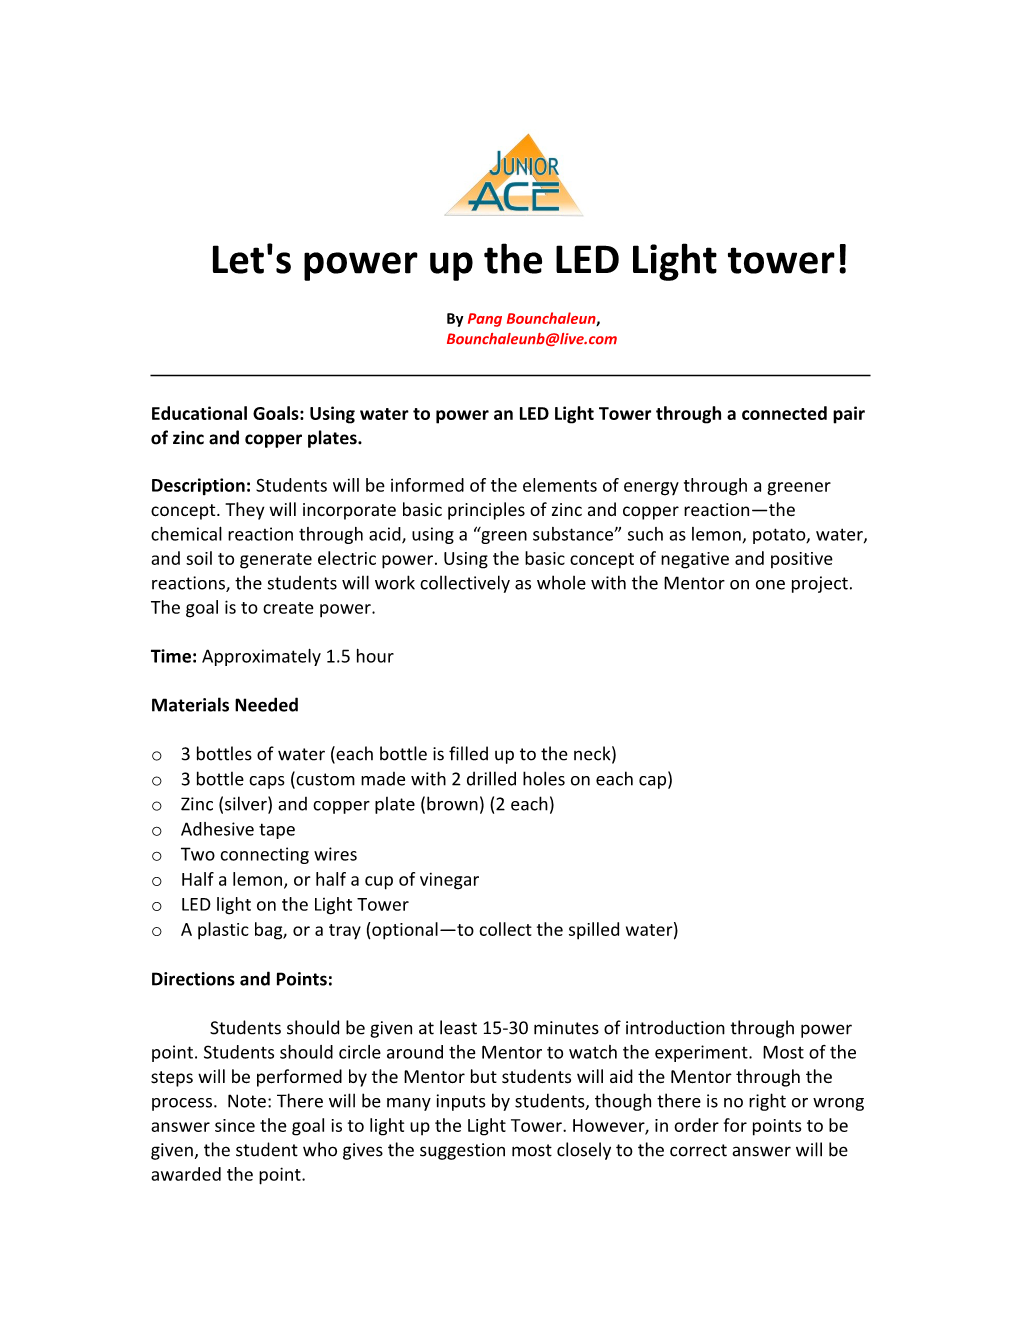 Let's Power up the LED Light Tower!